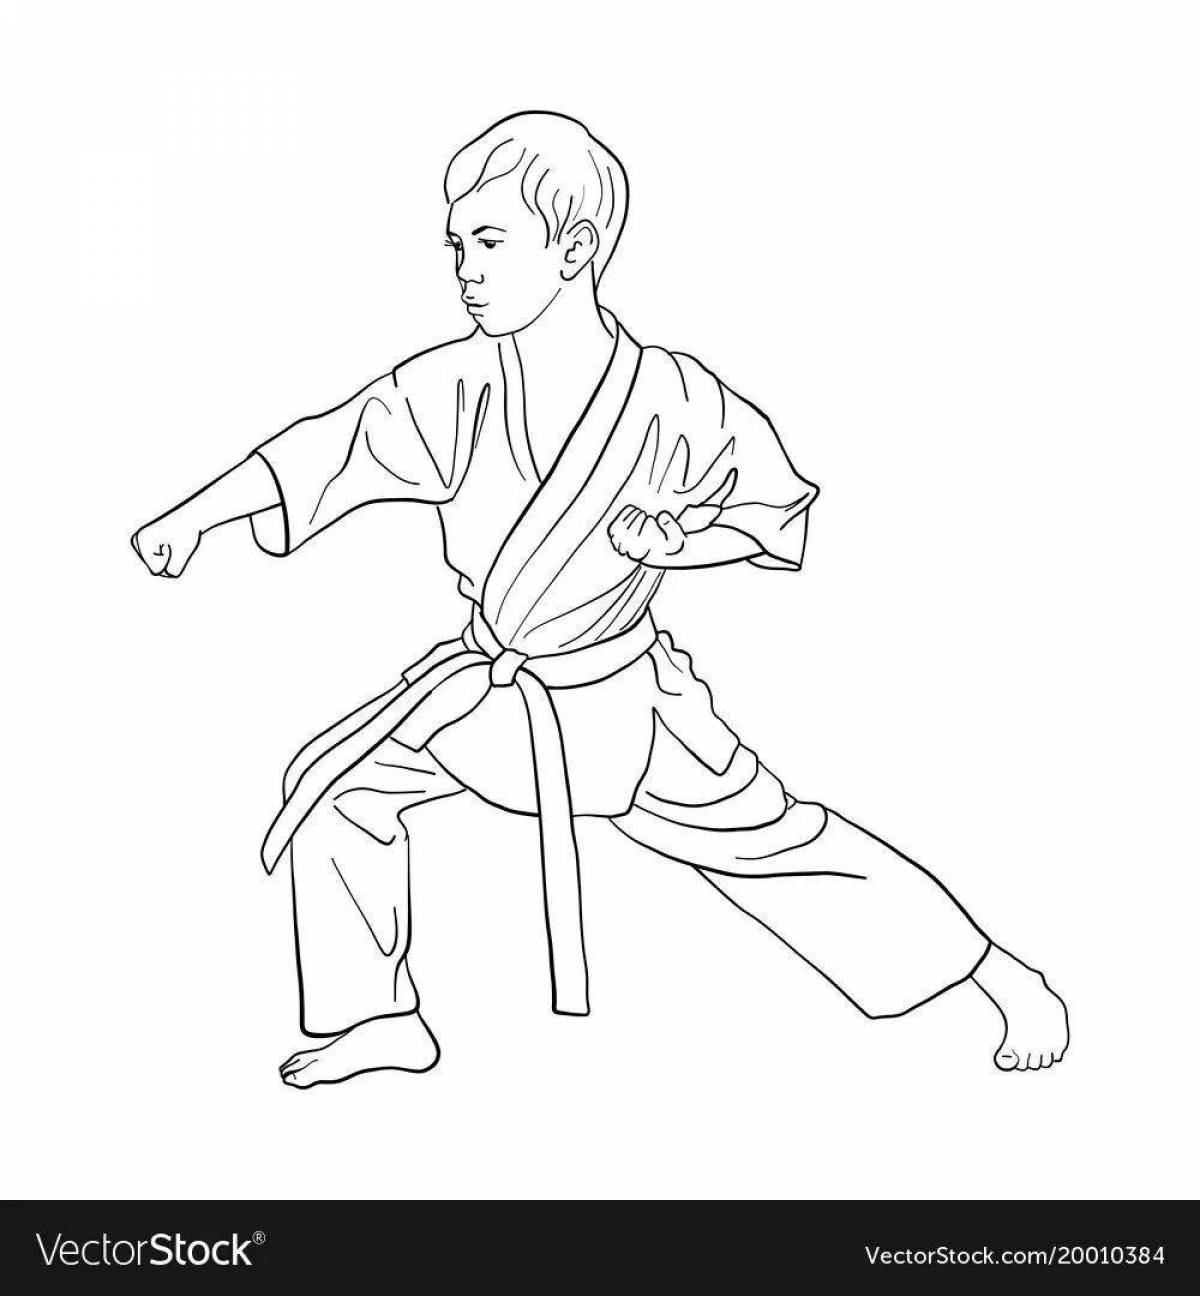 Karate coloring book for kids